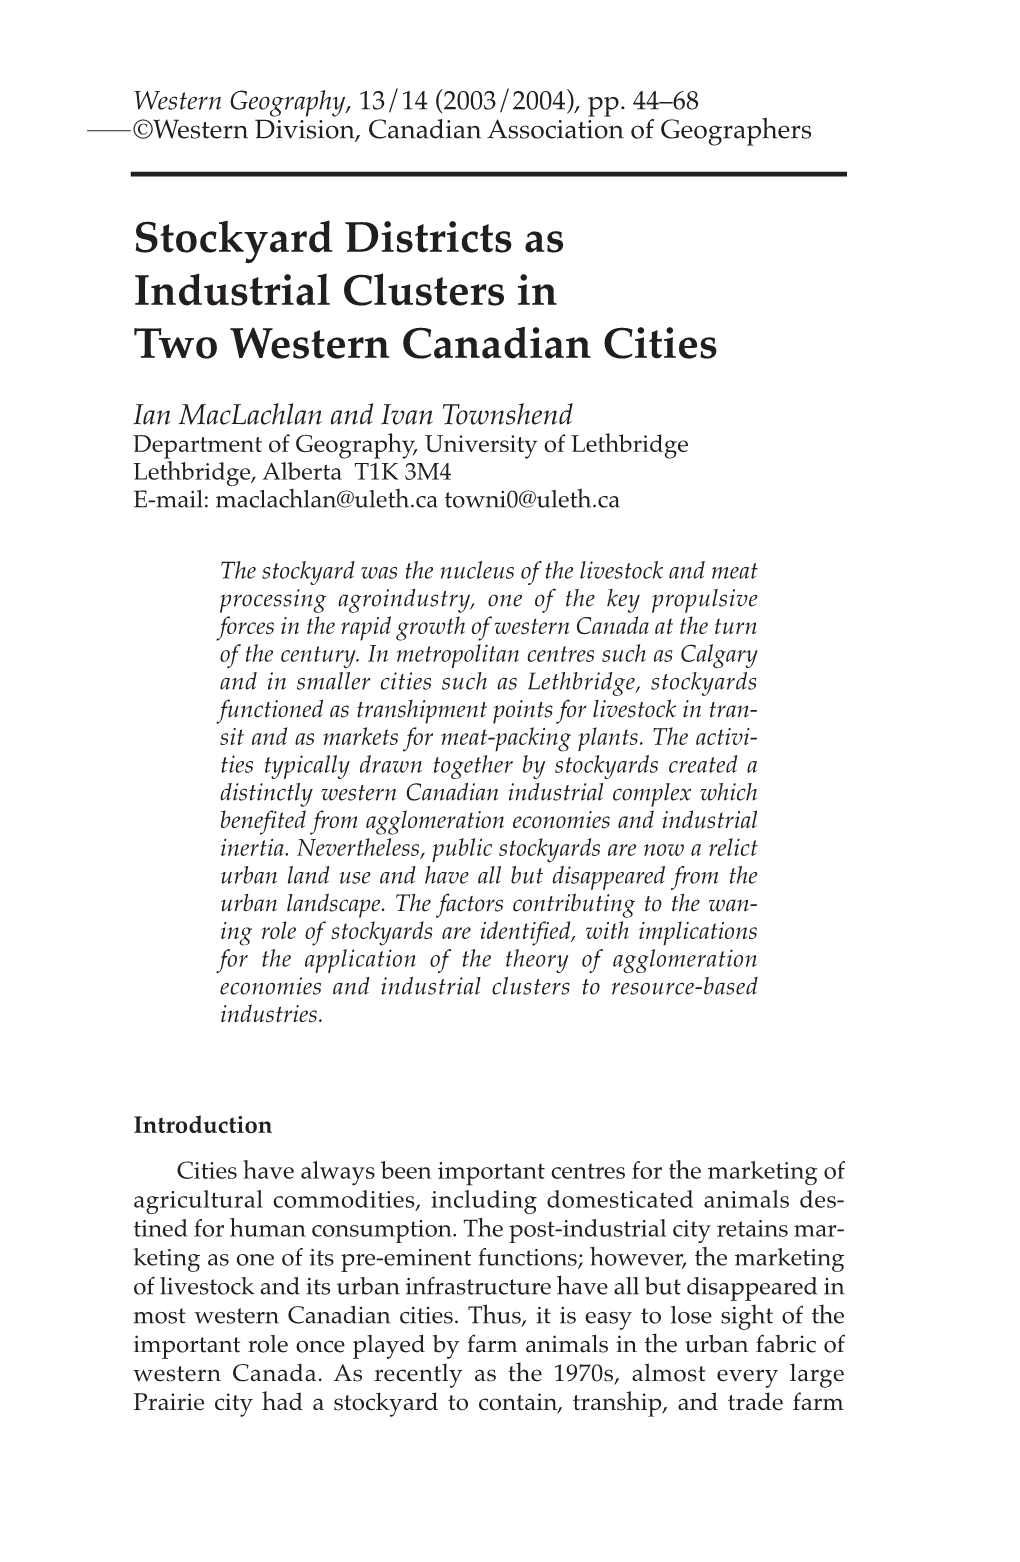 Stockyard Districts As Industrial Clusters in Two Western Canadian